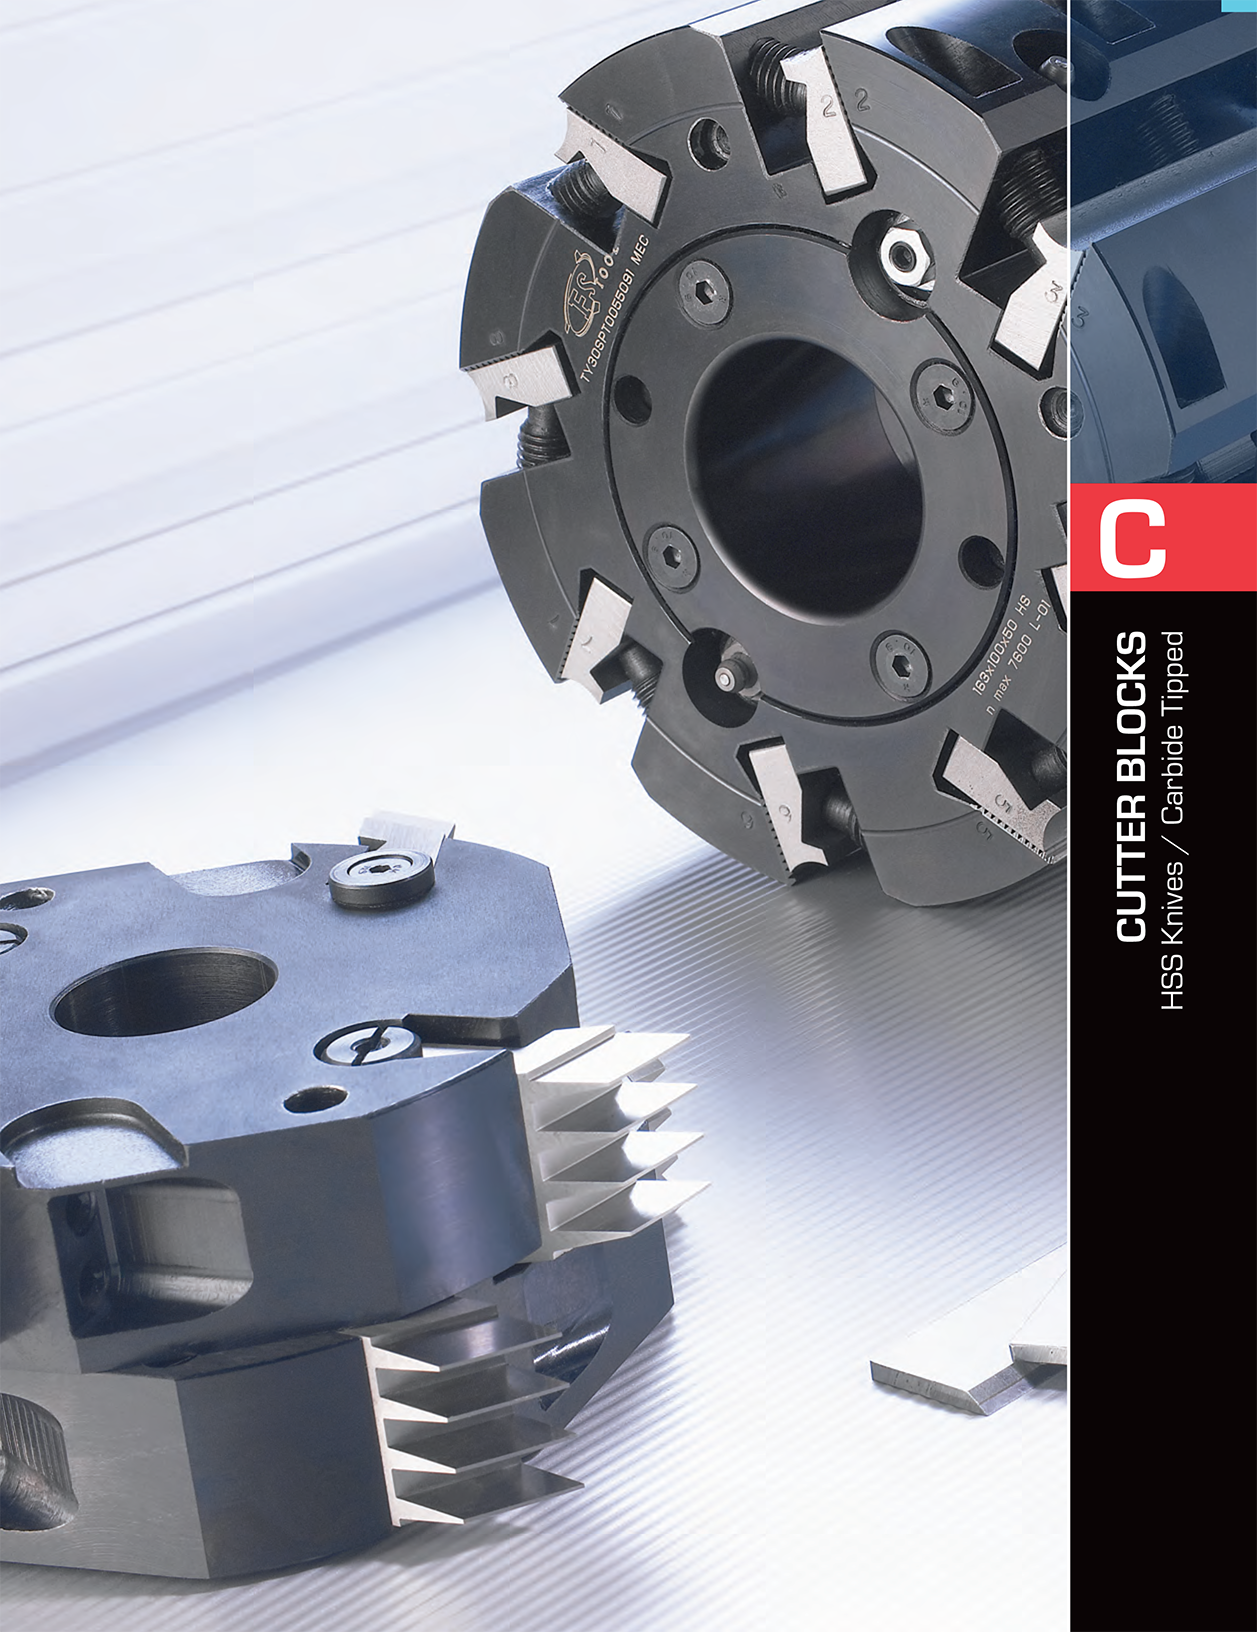 FS Tool Corporation - Cutting Tool Manufacturing and Solutions Provider